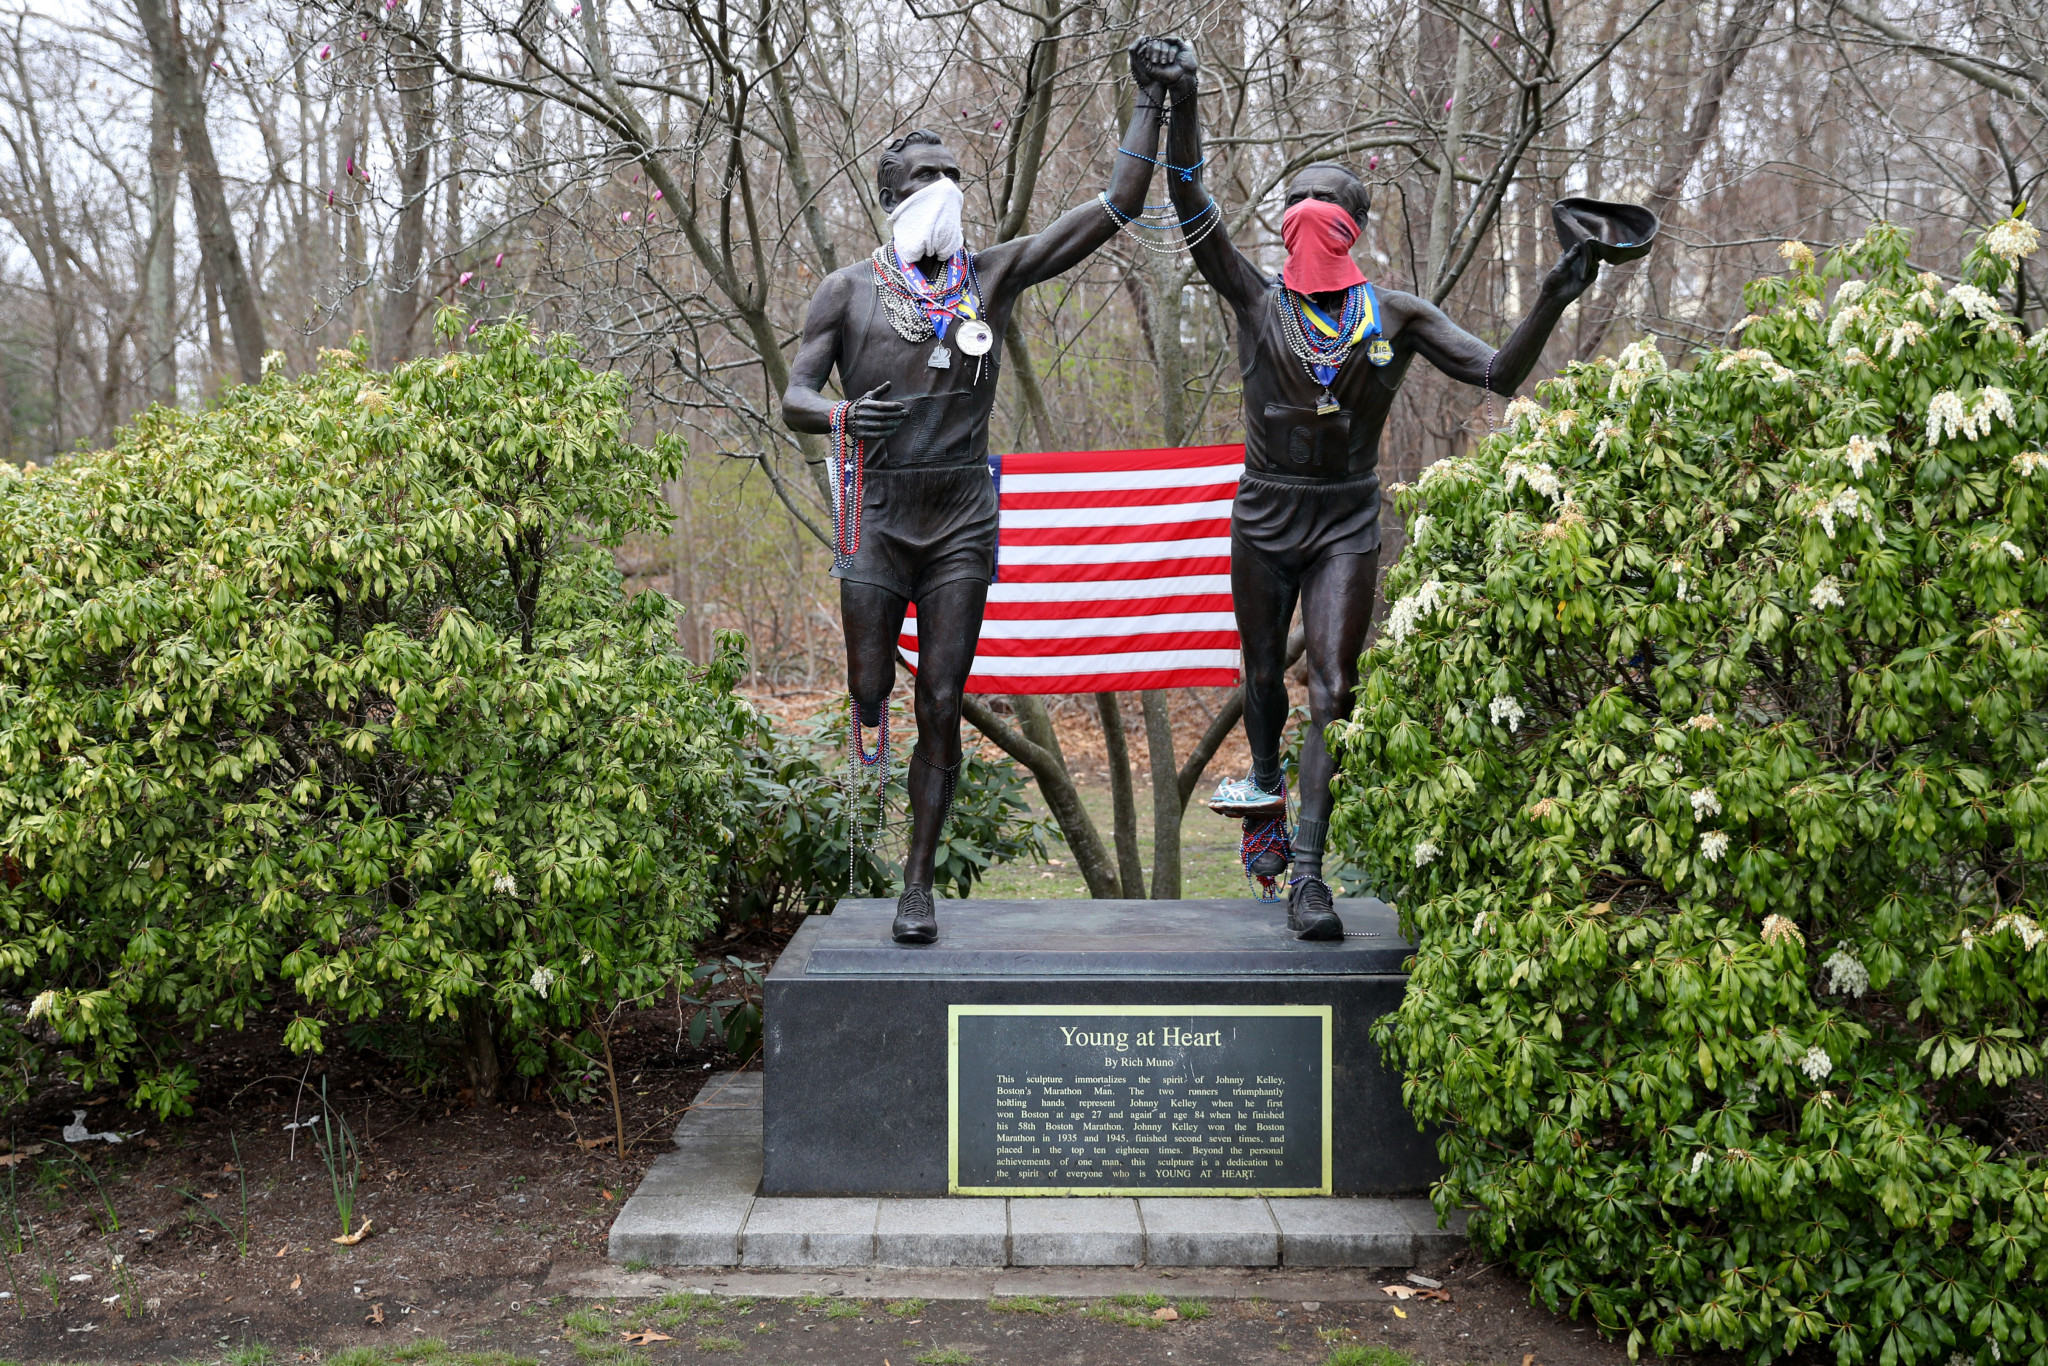 Face coverings were added to the statue of Johnny Kelley on the Heartbreak Hill section of the Boston Marathon course this year ©Getty Images